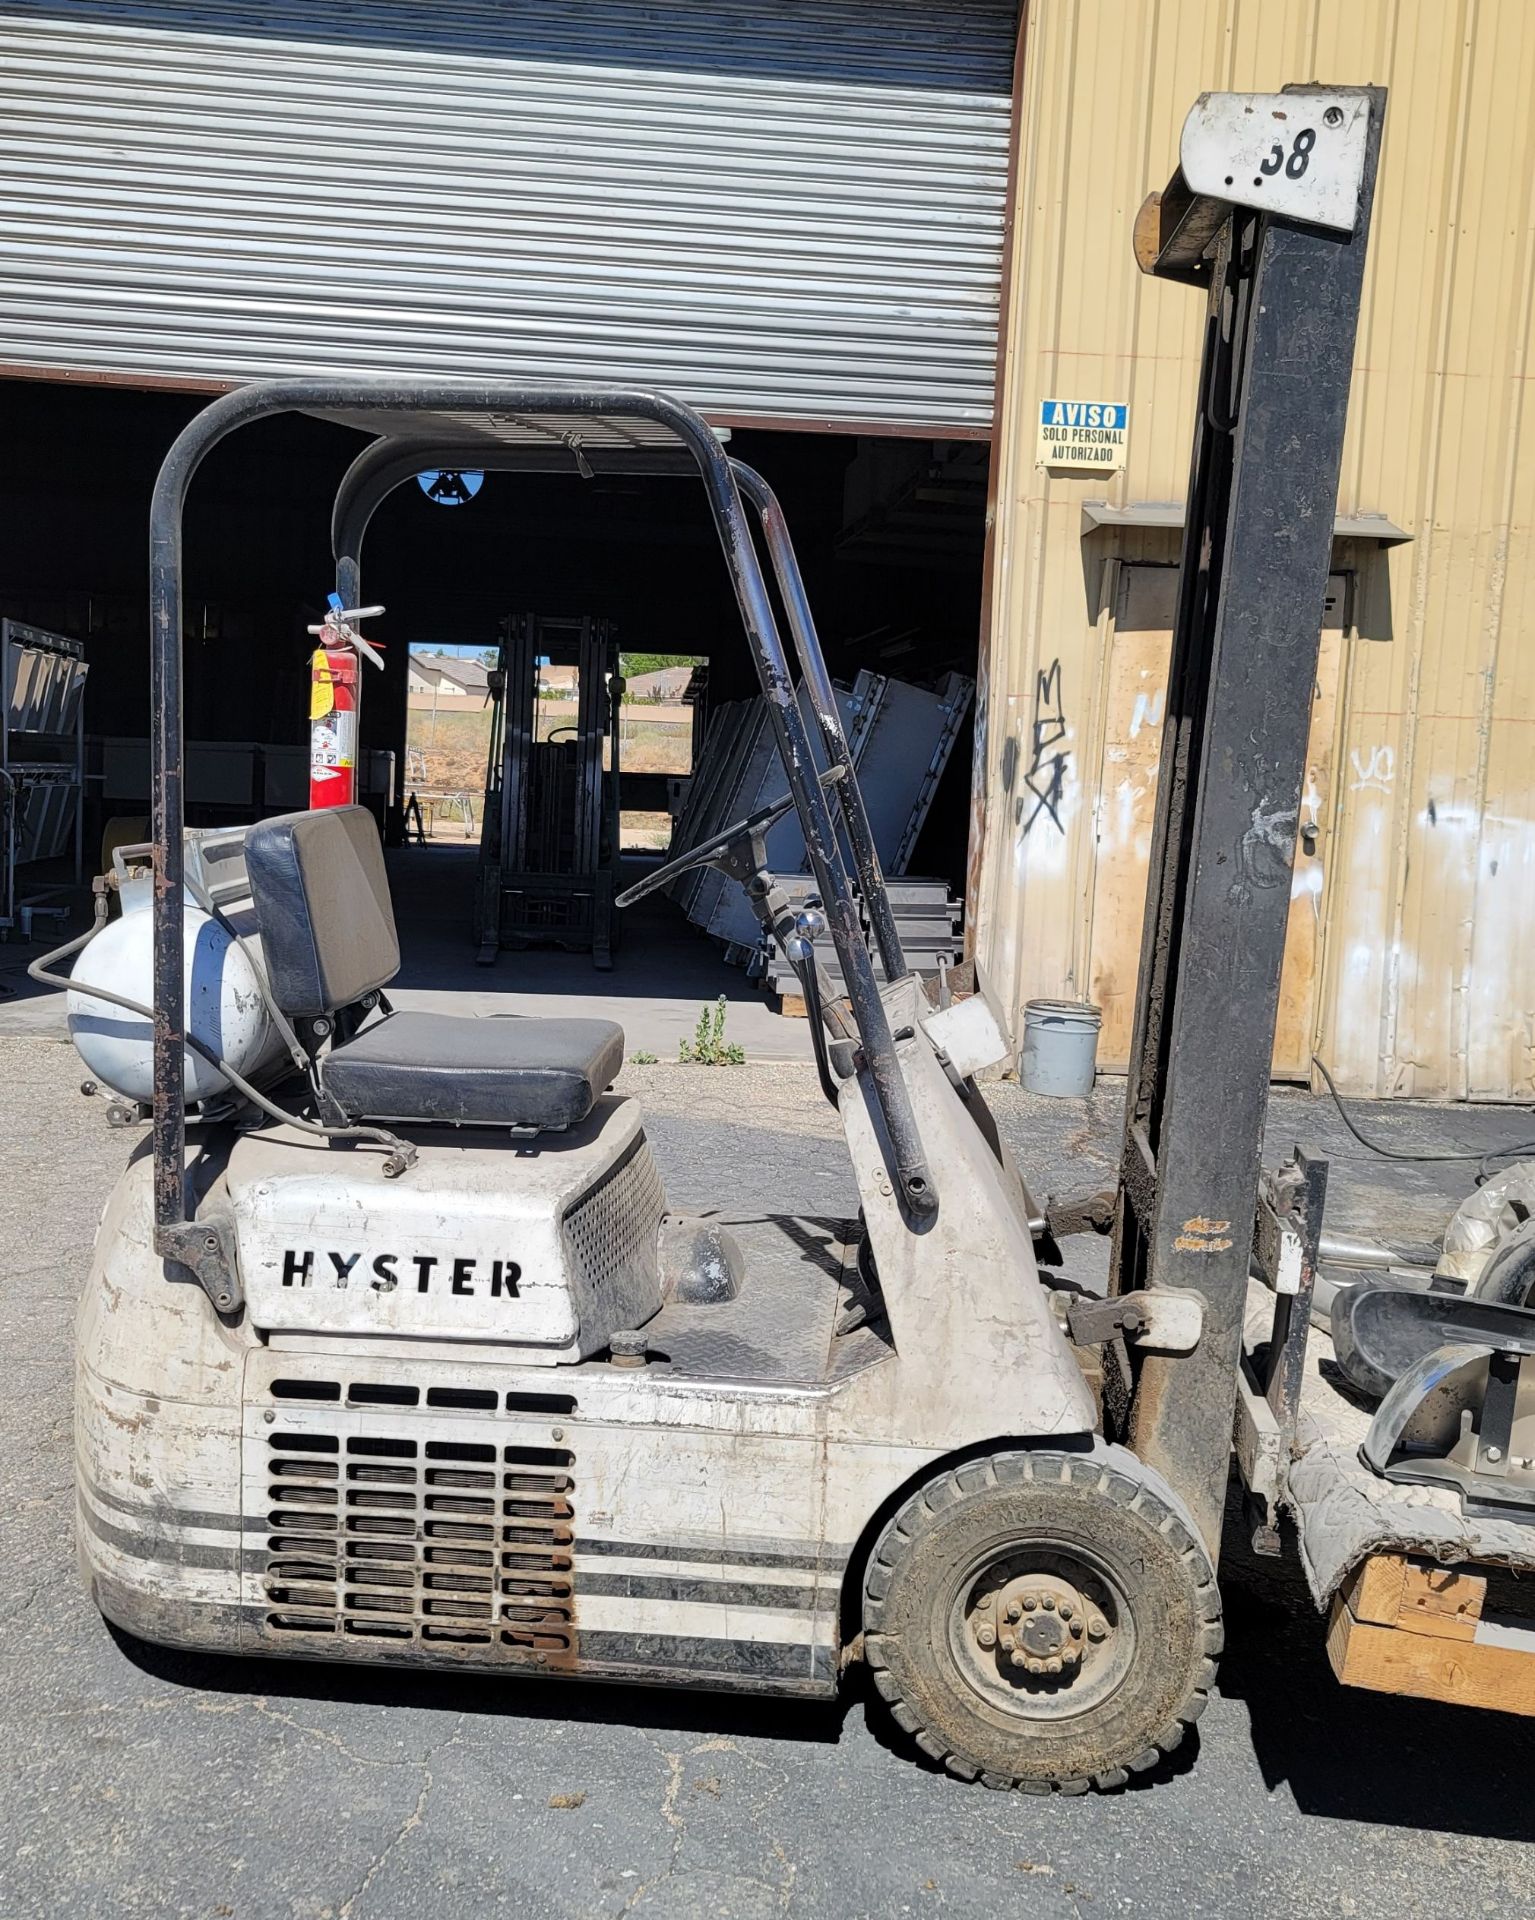 HYSTER LP FORKLIFT, MODEL H20E, 2,000 LB CAPACITY, SINGLE STAGE MAST, 8,434 HOURS, SOLID TIRES, 4' - Image 2 of 5